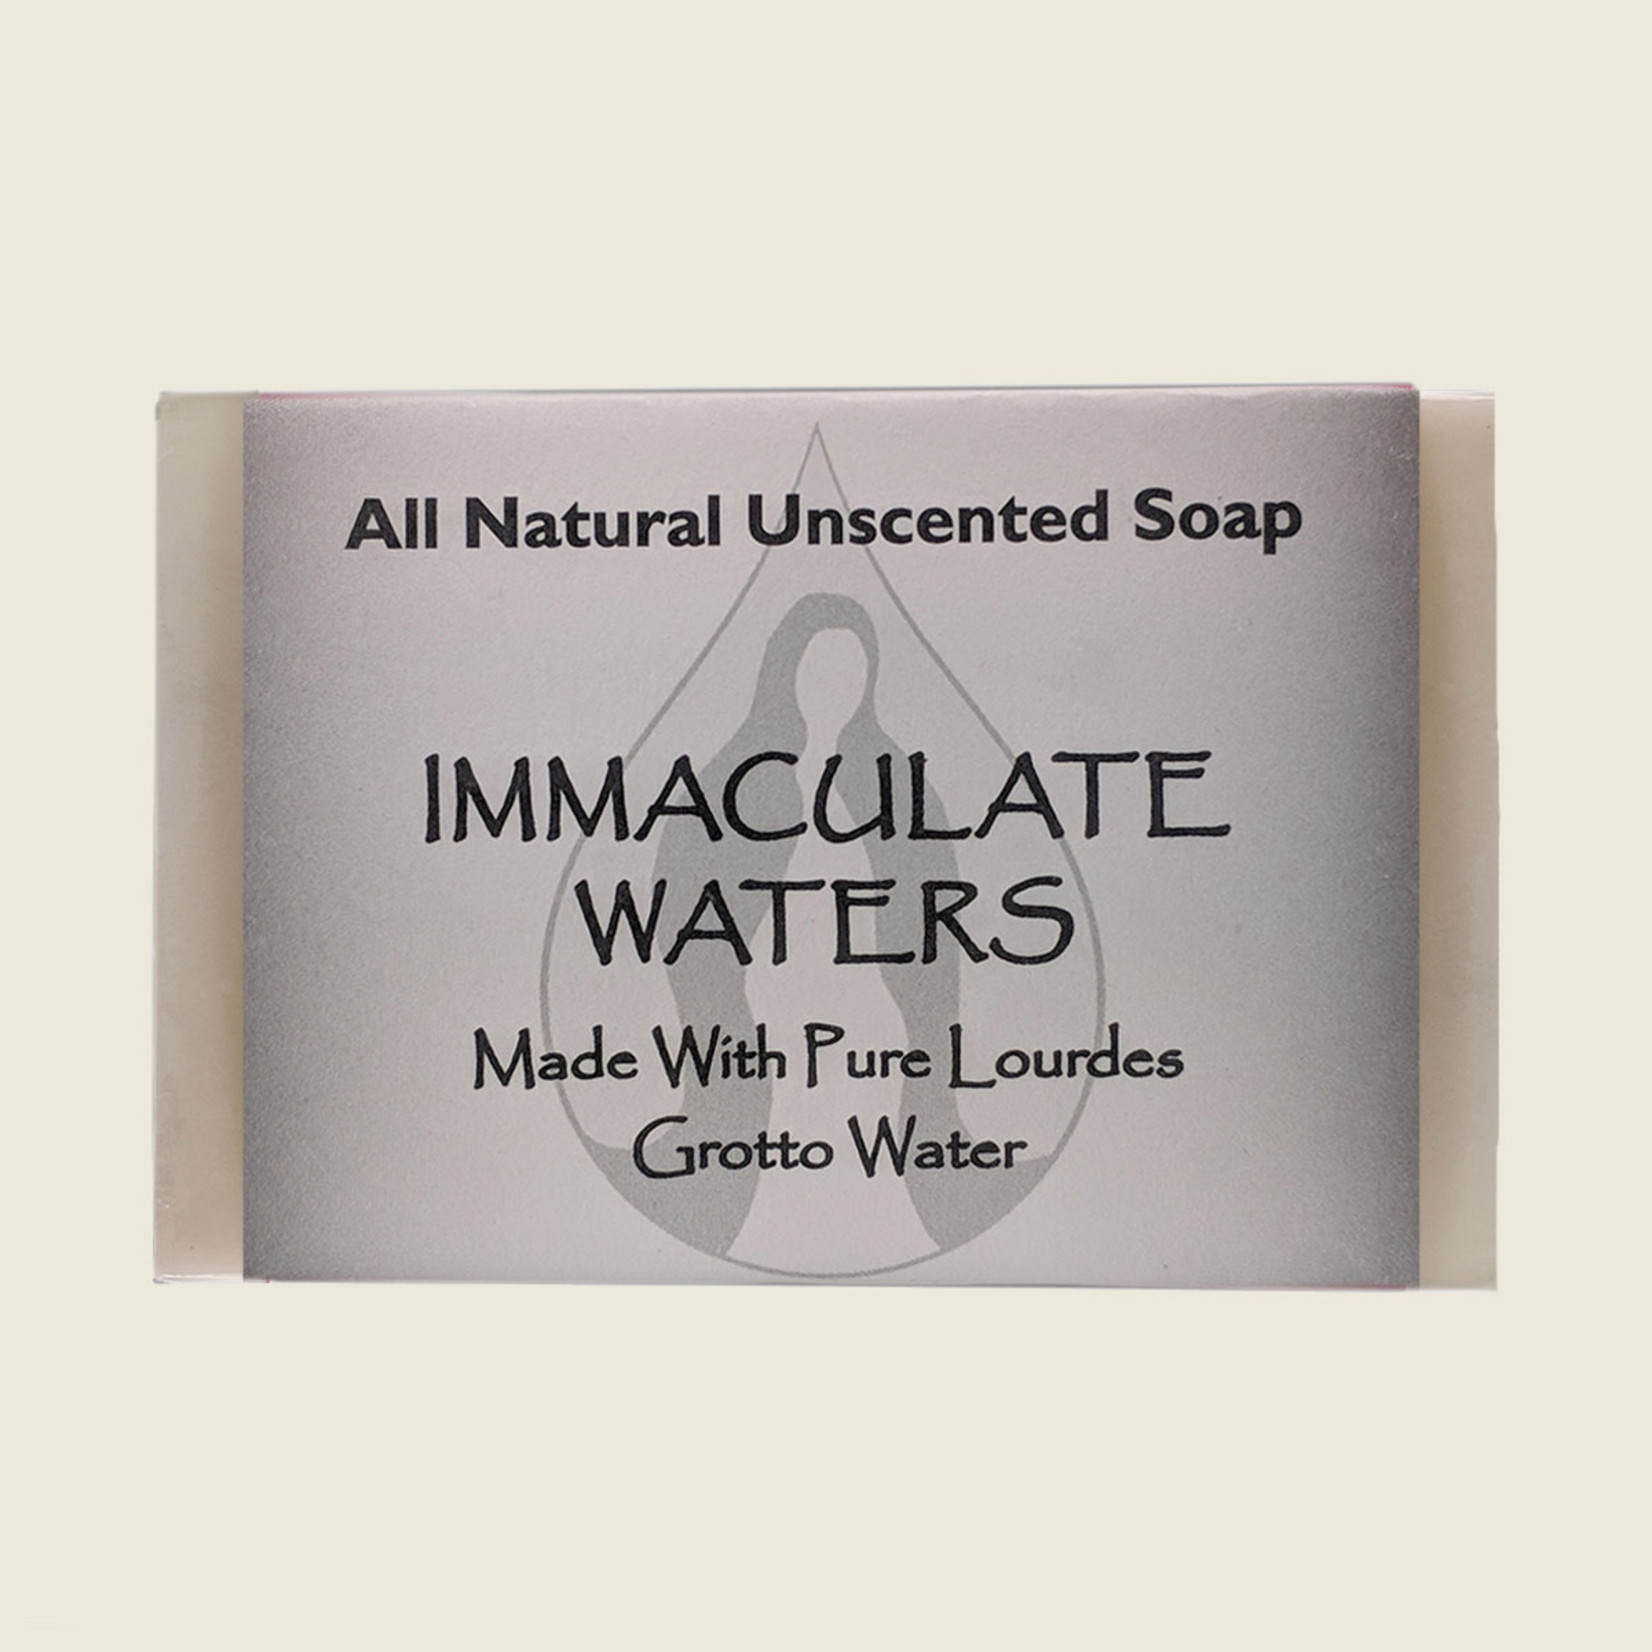 Immaculate Waters Unscented Bar Soap